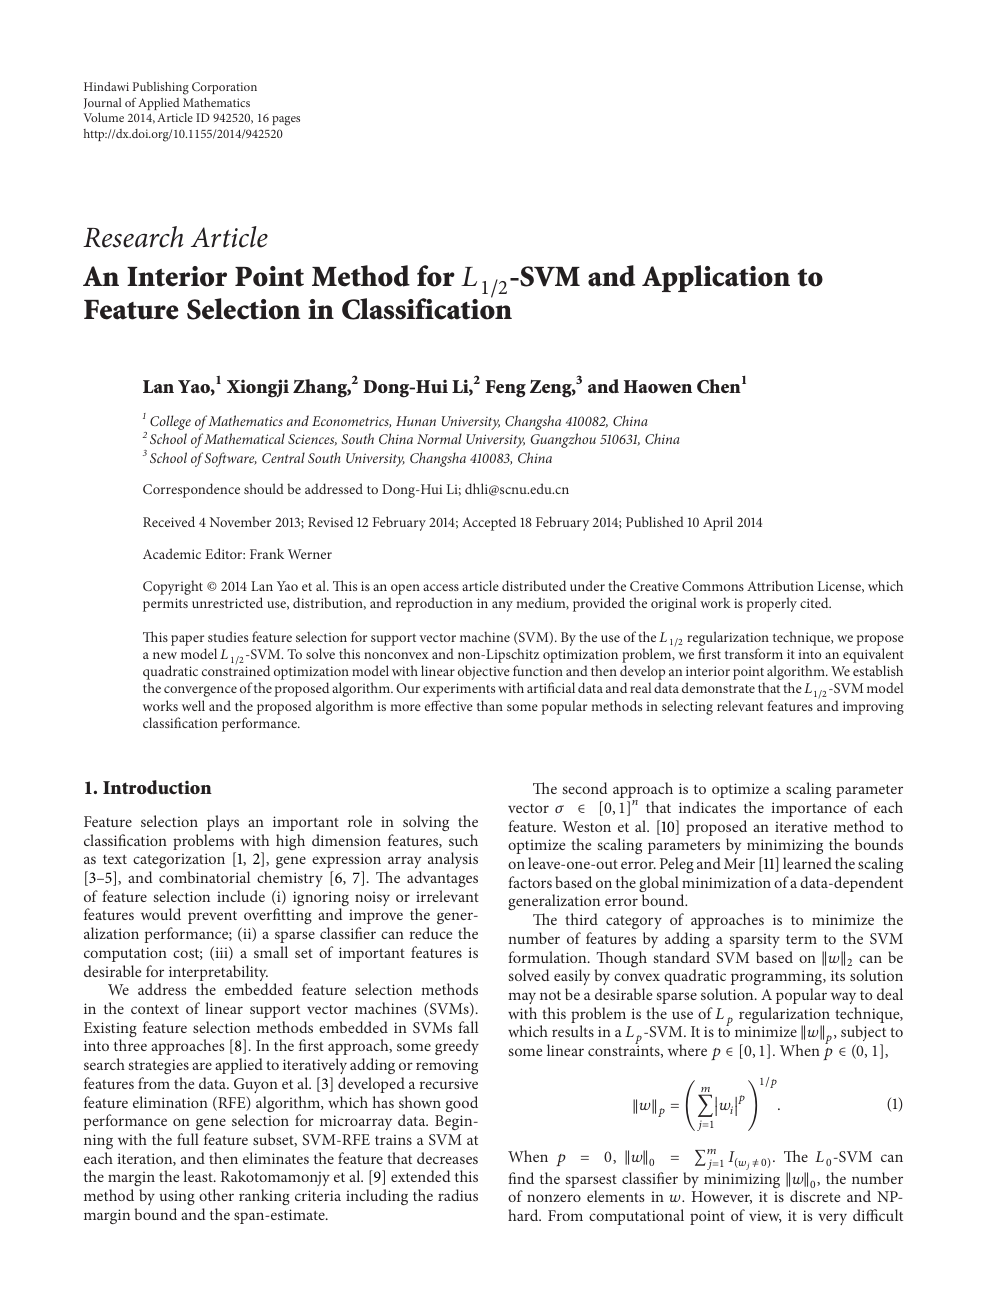 An Interior Point Method For Svm And Application To Feature Selection In Classification Topic Of Research Paper In Mathematics Download Scholarly Article Pdf And Read For Free On Cyberleninka Open Science